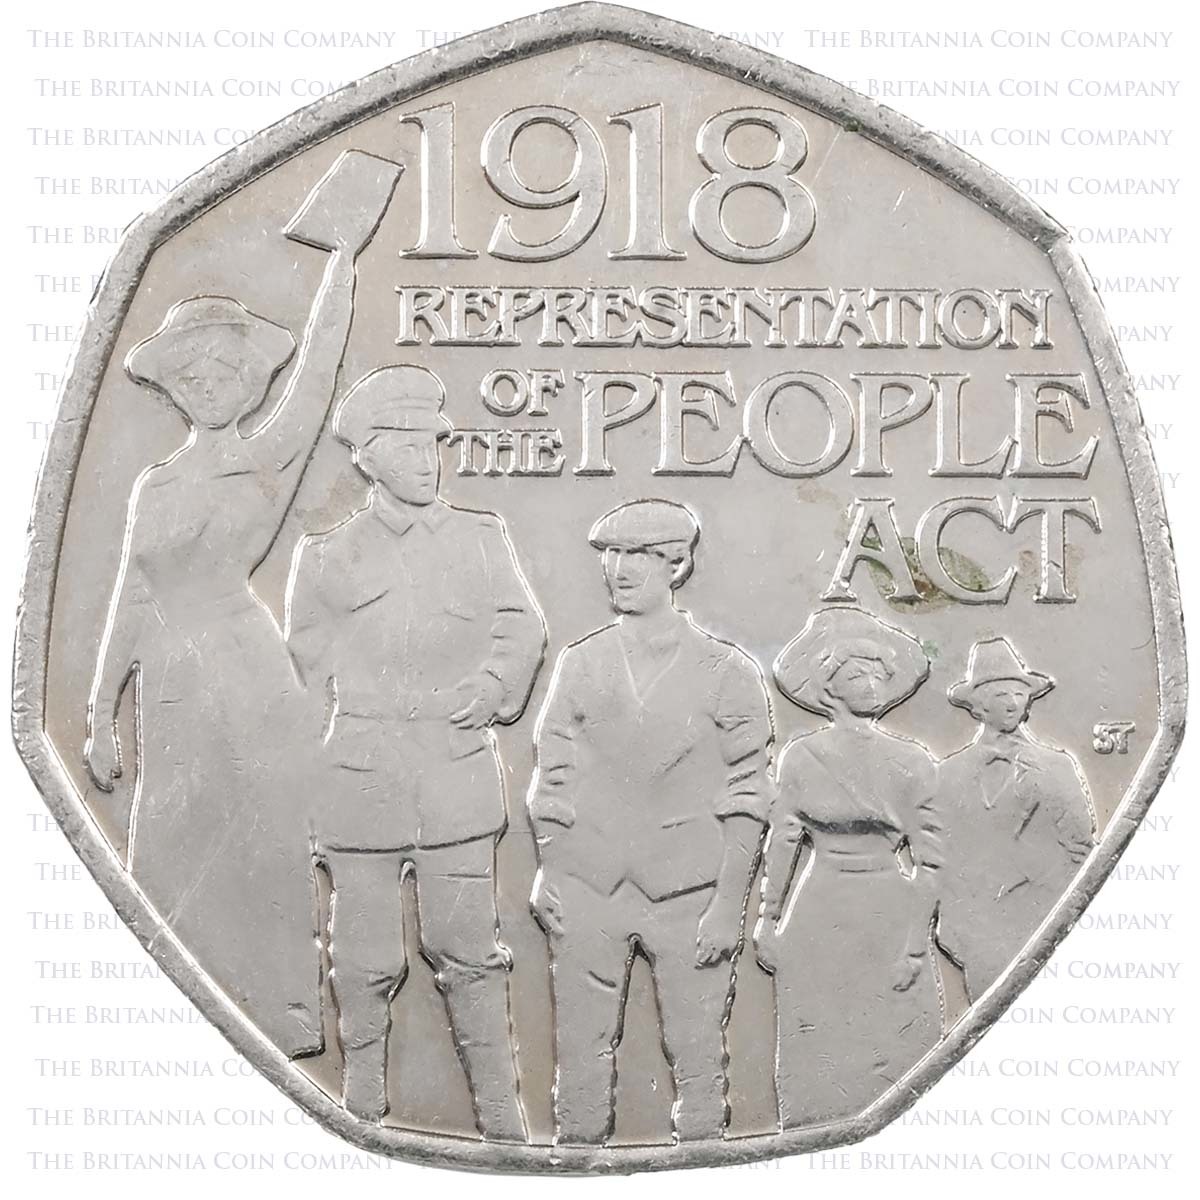 2018 Representation Of The People Act Circulated Fifty Pence Coin Reverse